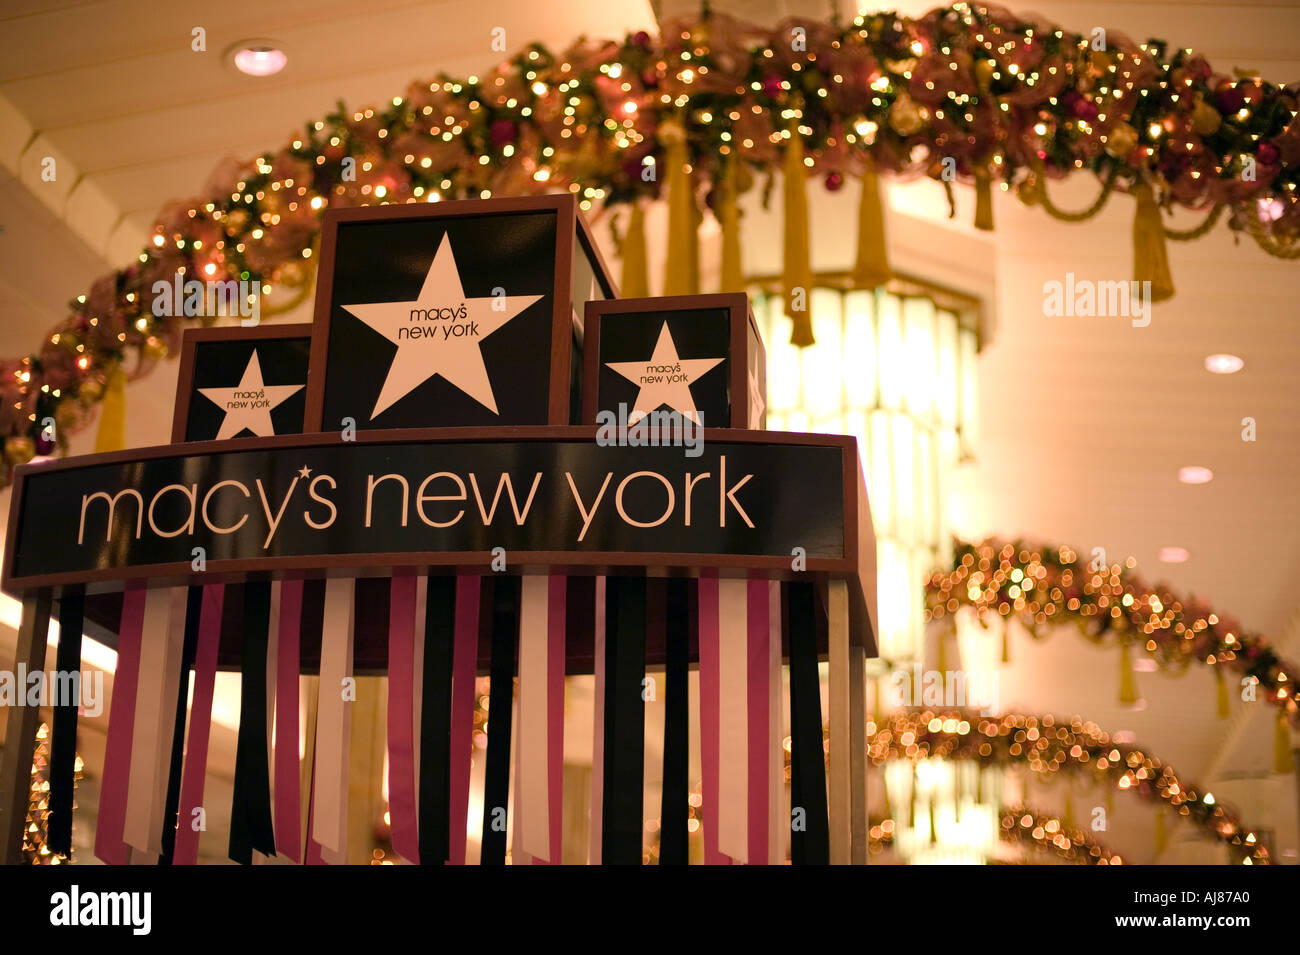 Christmas Holiday decorations inside Macy s Department Store at ...